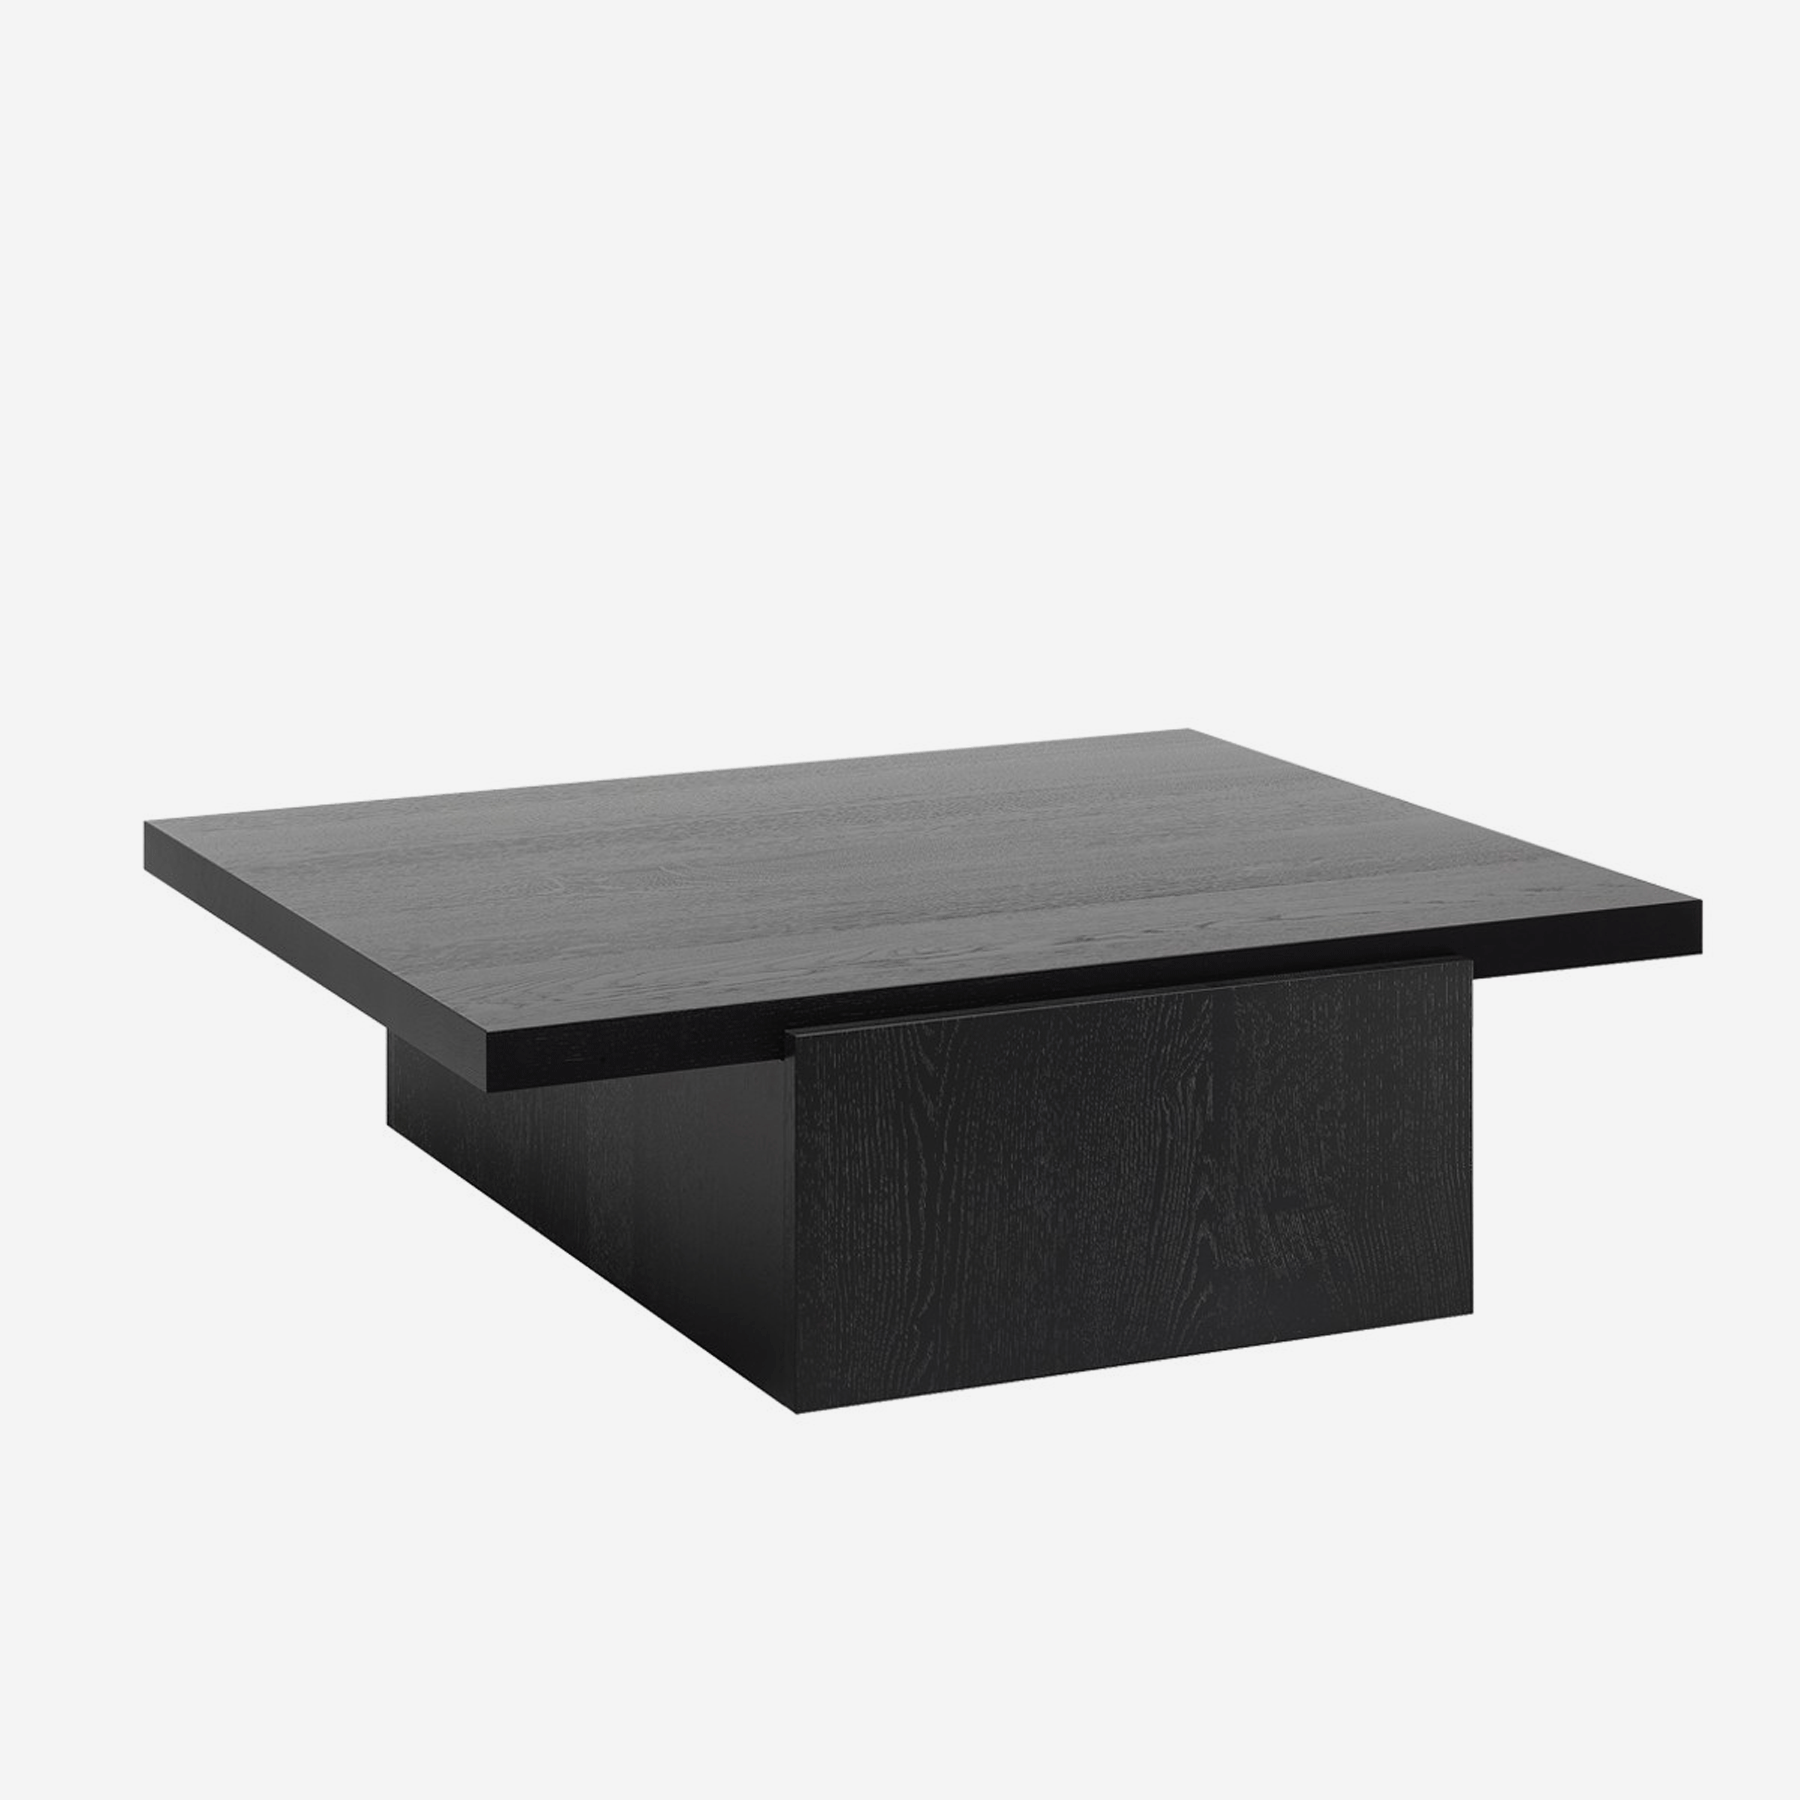 DT02 Tore Coffee Table